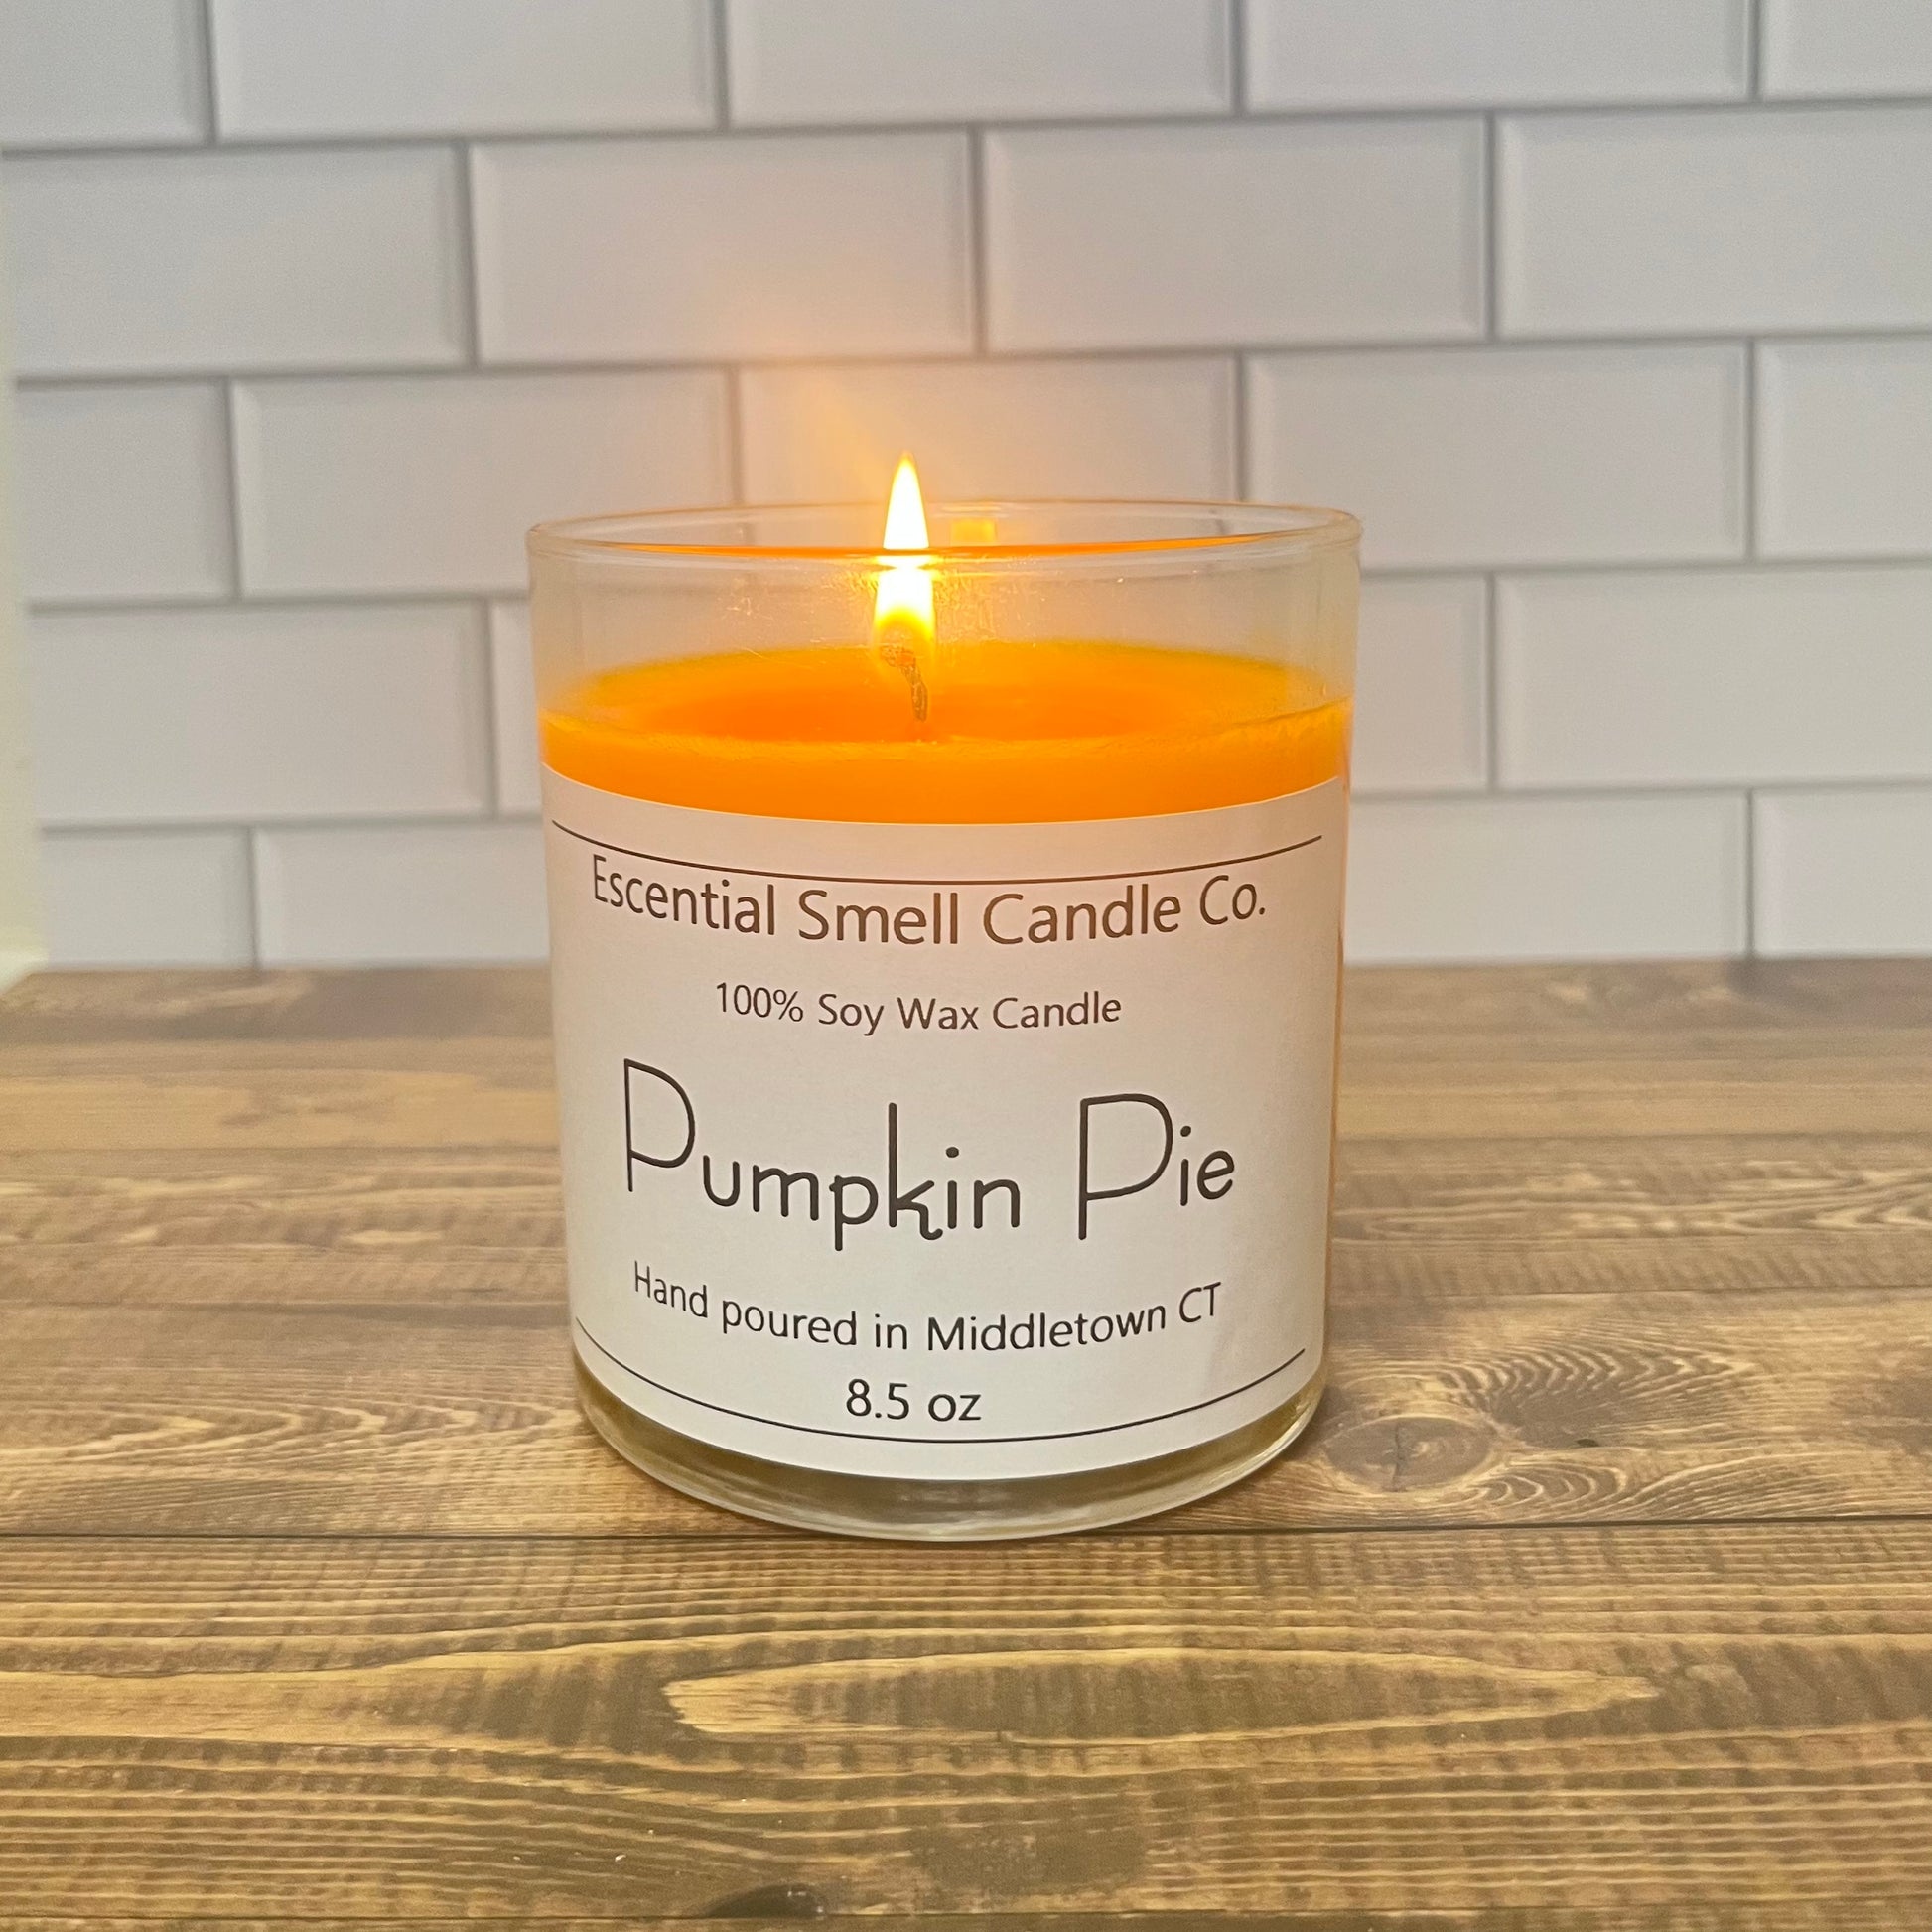 Pumpkin pie scented candle is the epitome of fall, and Pumpkin Pie is the perfect way to get your season started! Pumpkin pie has strong notes of cinnamon, nutmeg and ginger with middle notes of pumpkin Vanilla and pie crust; And to top it off, its orange!